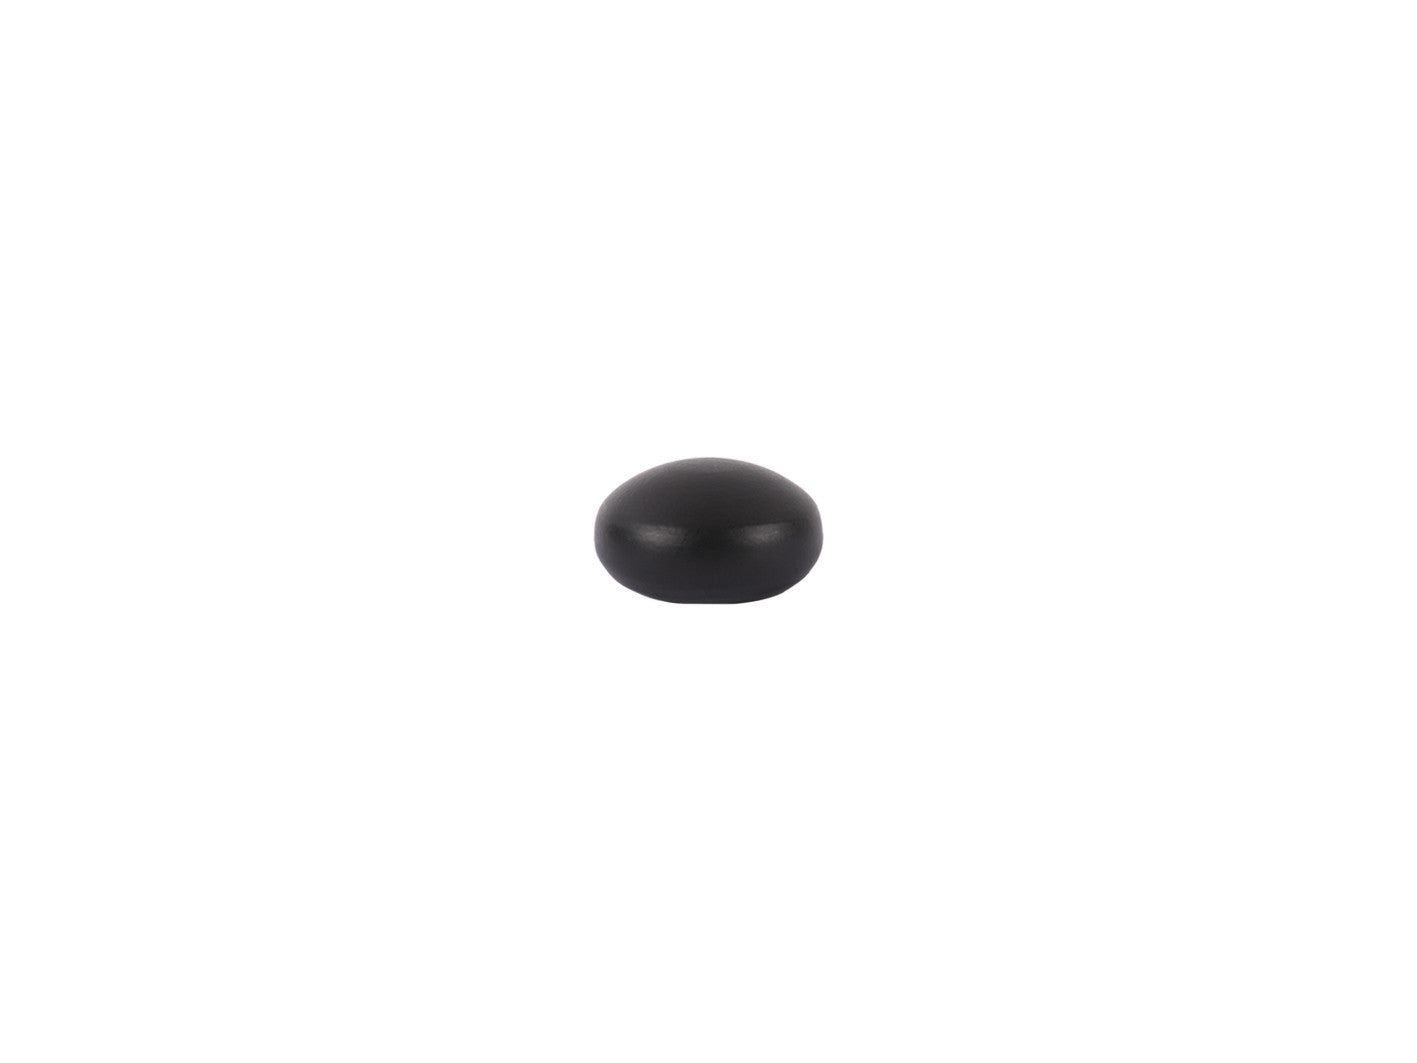 Elliptical Finial in black for 19mm curtain pole end